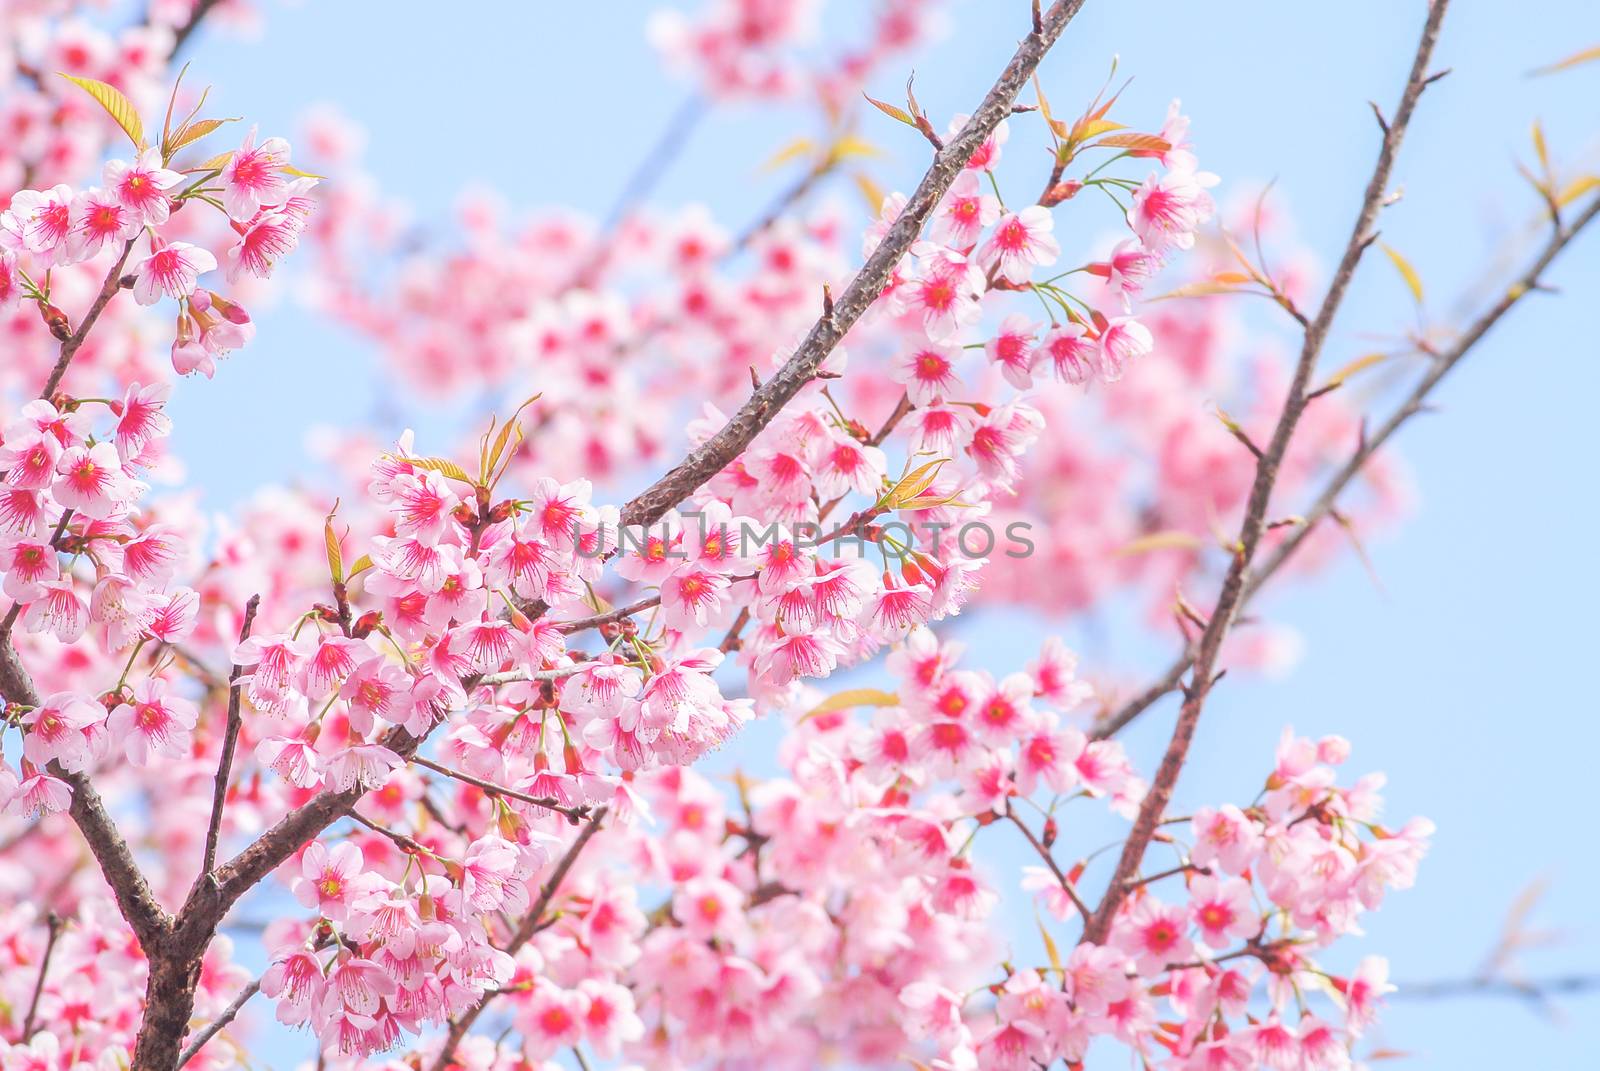 Spring time with beautiful cherry blossoms, pink sakura flowers.